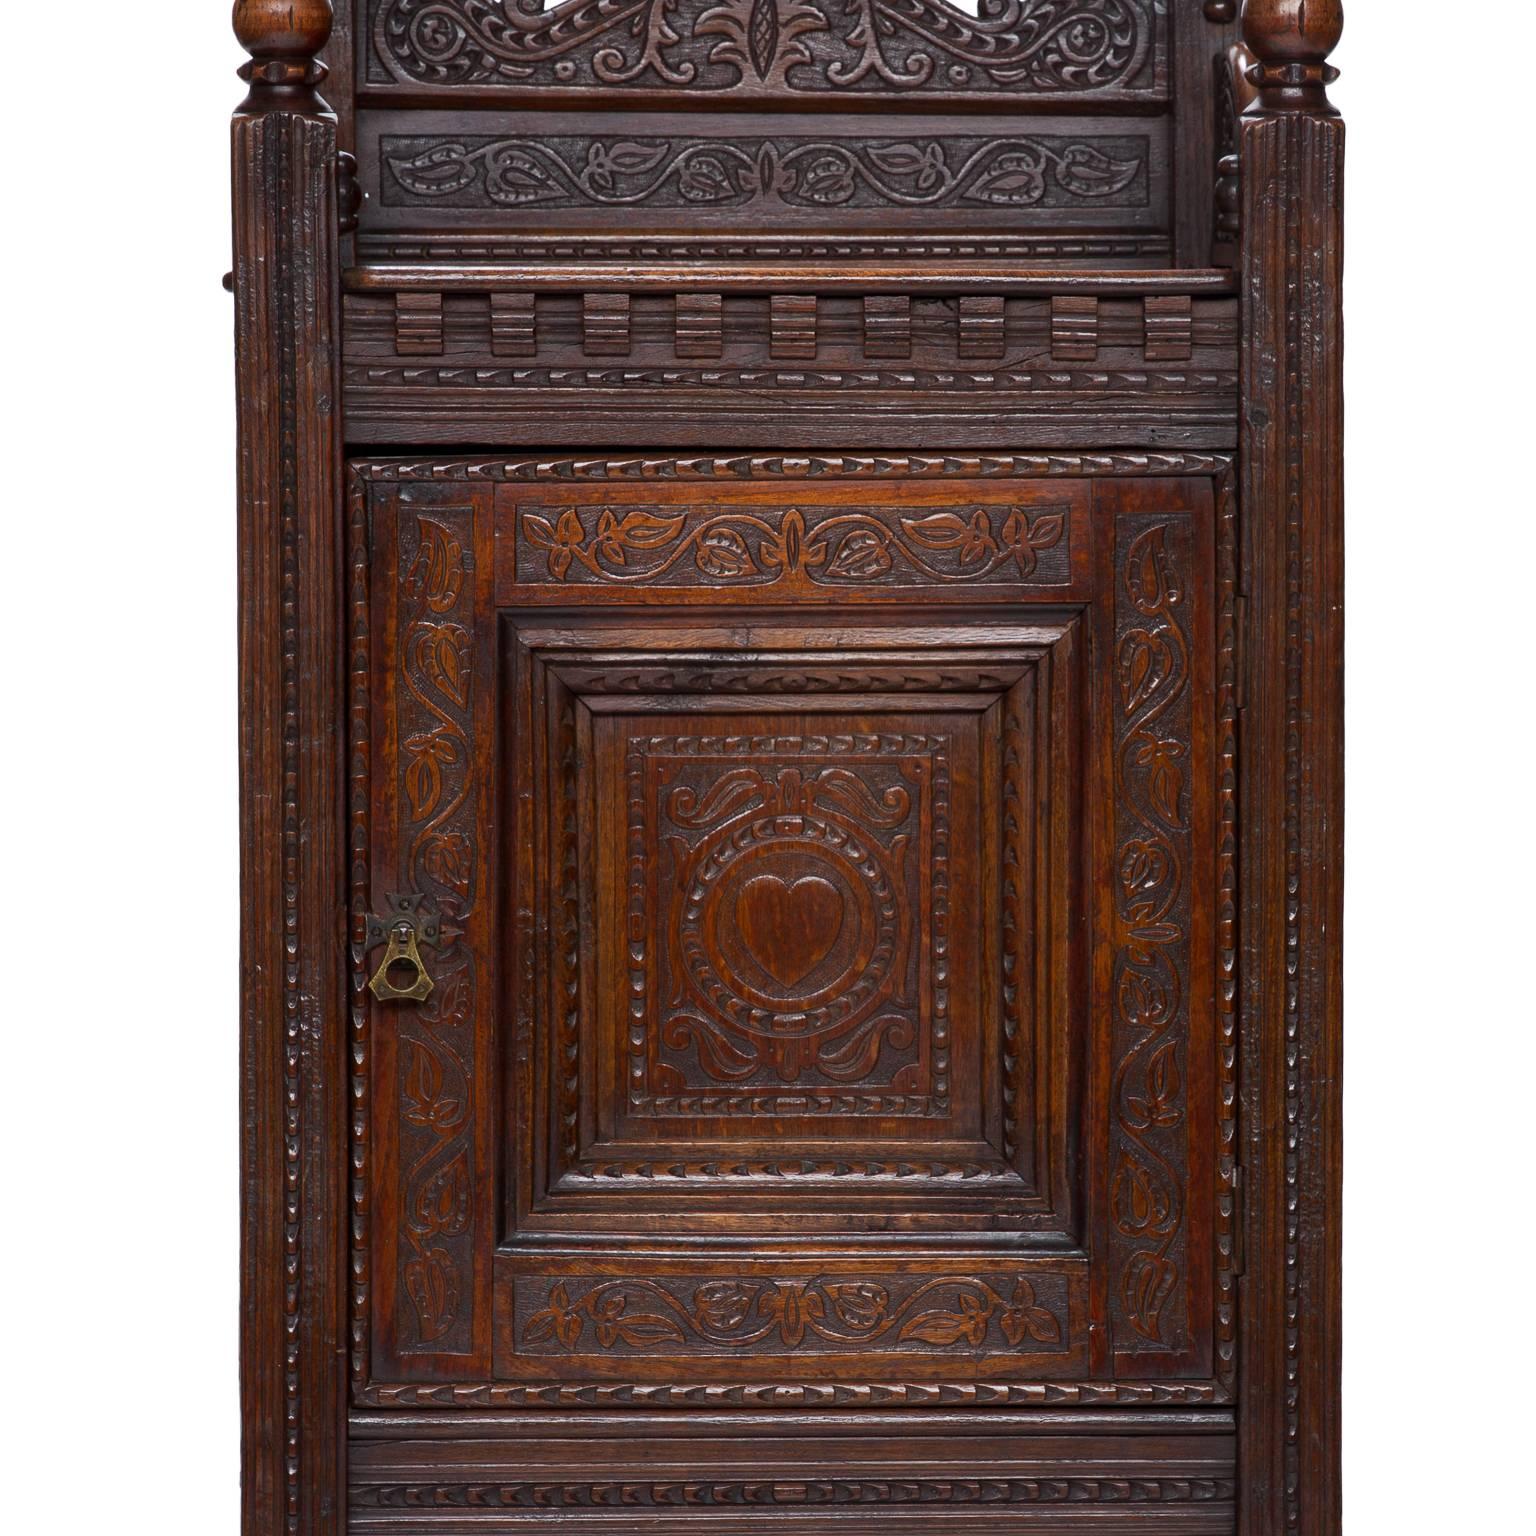 French 18th Century Cabinet from Burgundy Region of France